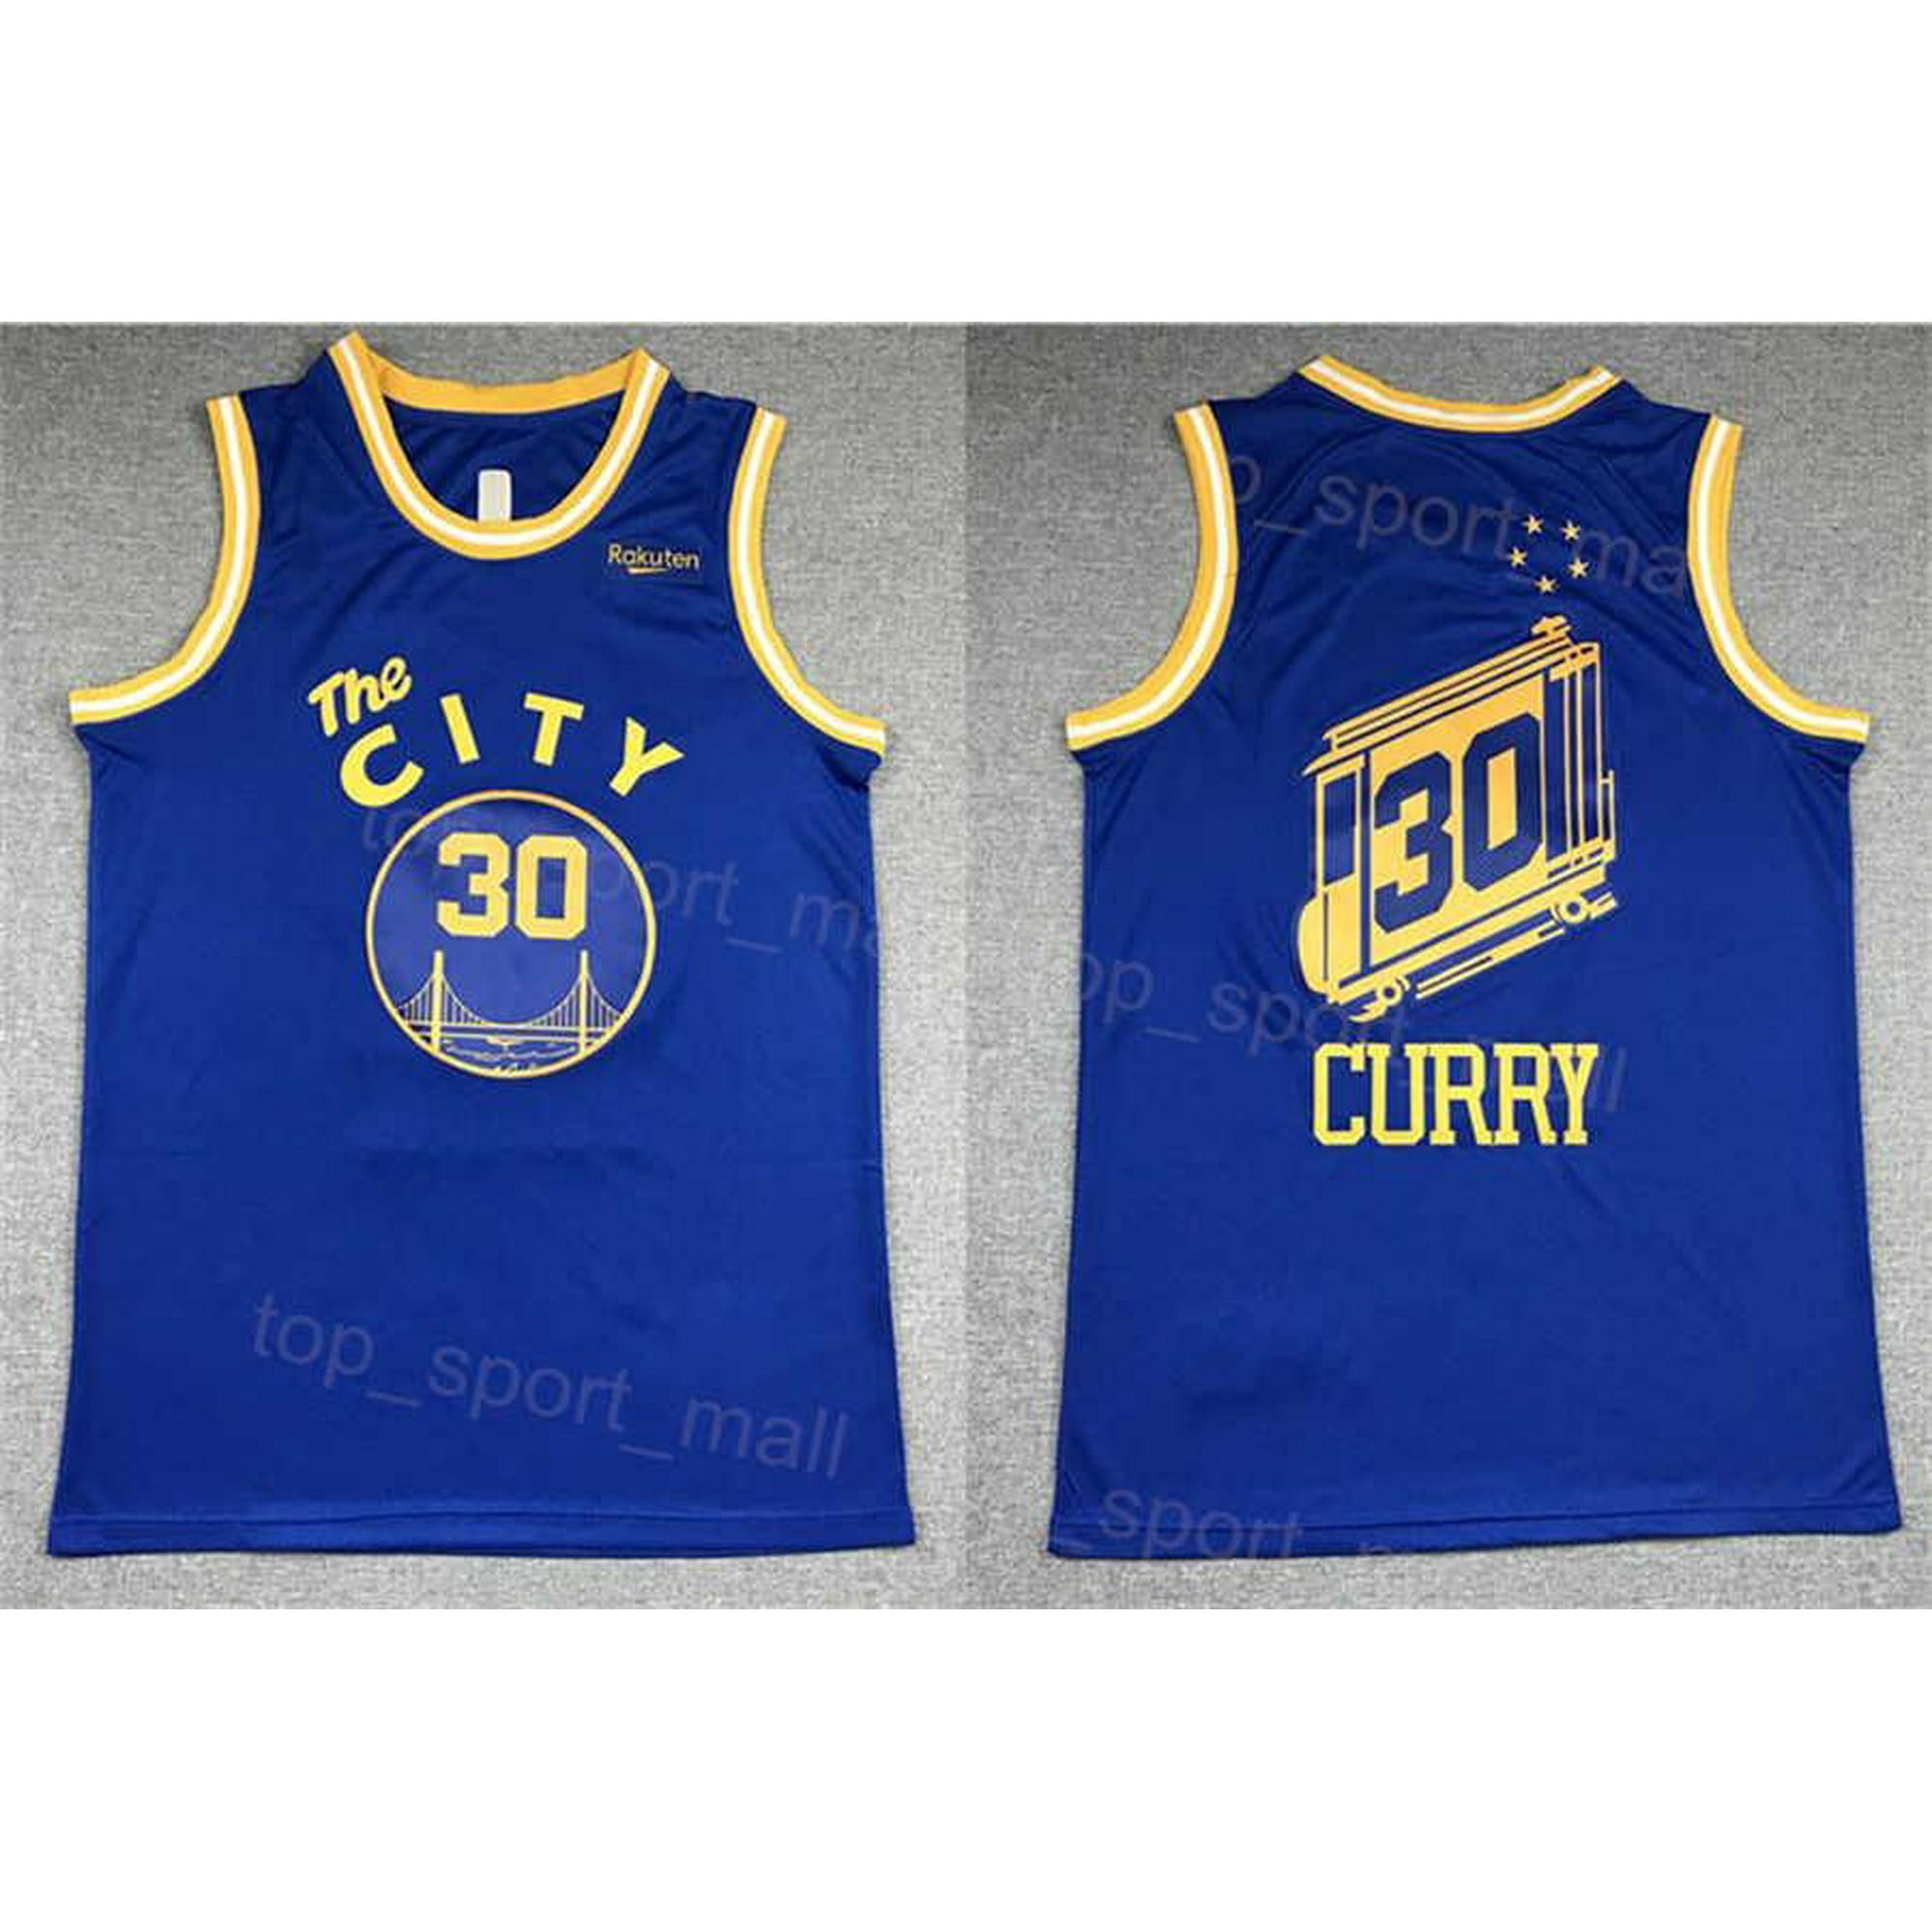 stephen curry jersey